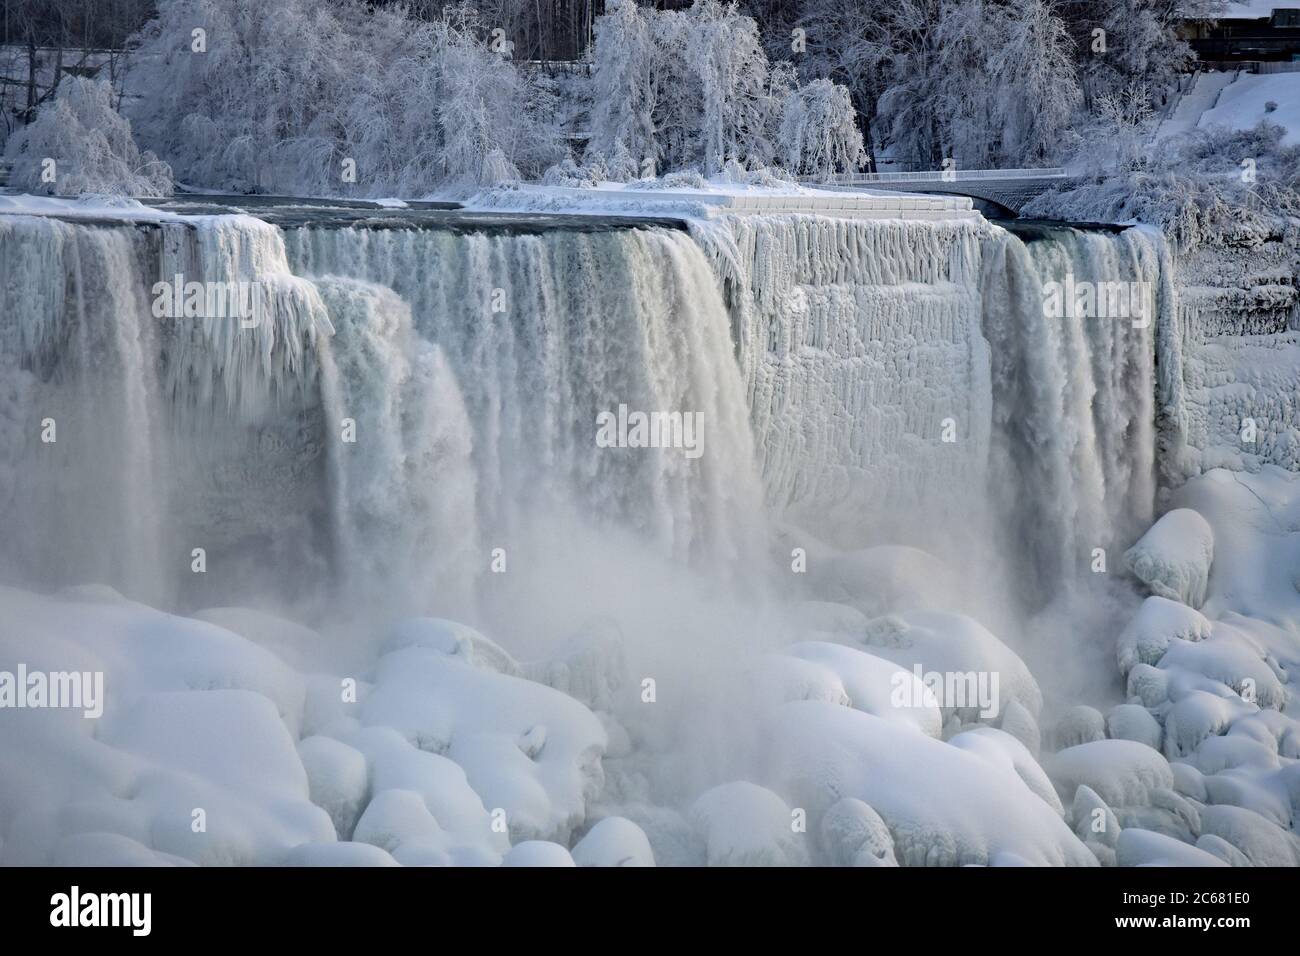 American Falls and Bridal Veil falls during winter.  Frozen Trees and boulders and snow on the ground. Mist rising from the falls. Niagara Falls. Stock Photo